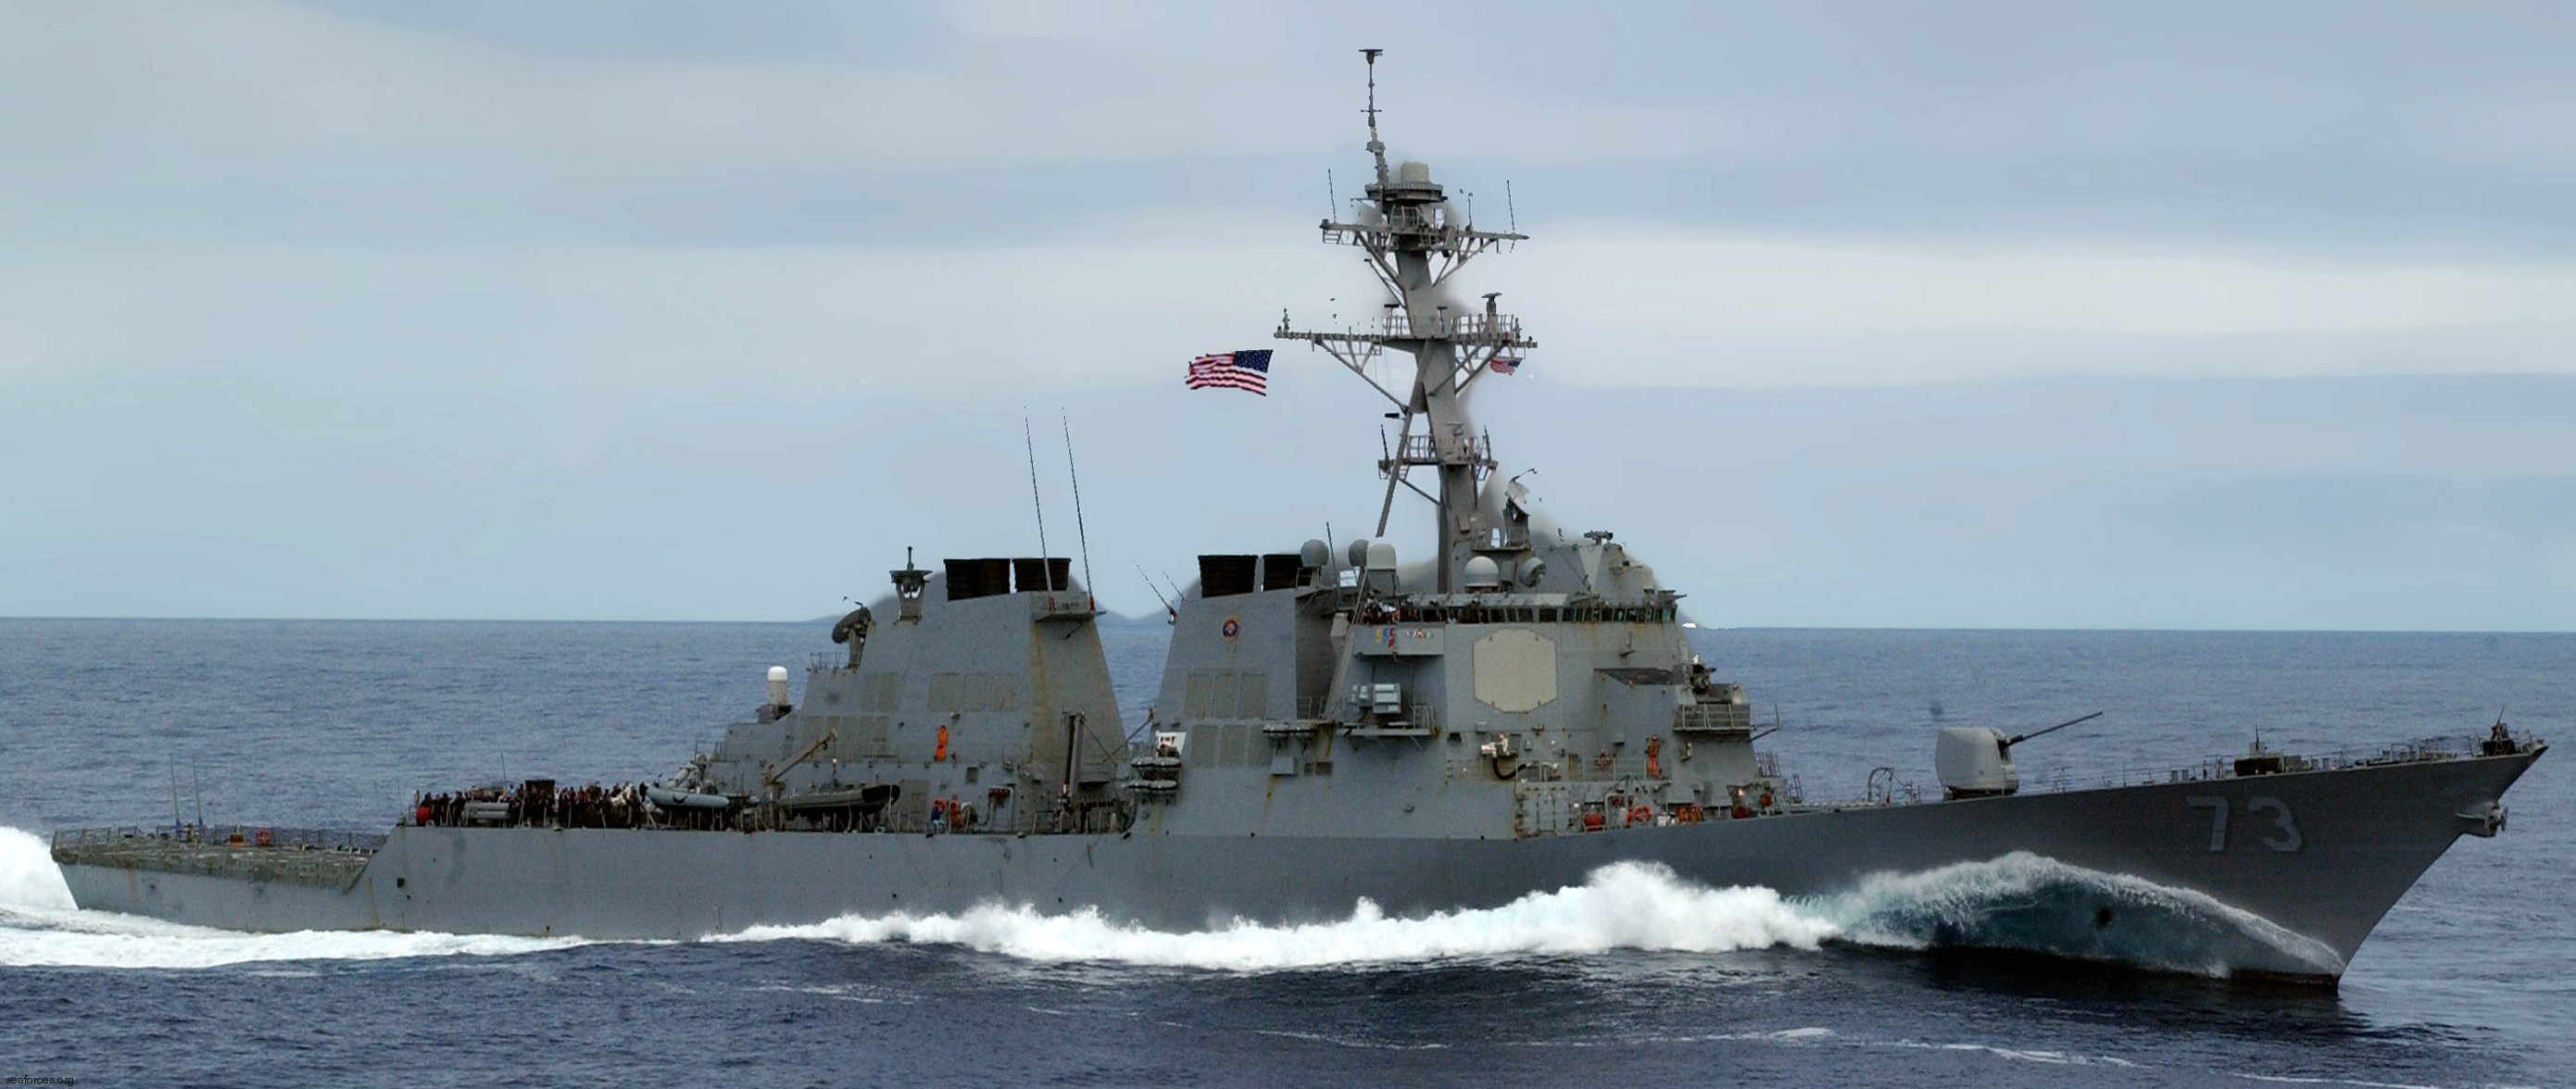 ddg-73 uss decatur guided missile destroyer arleigh burke class aegis bmd 36